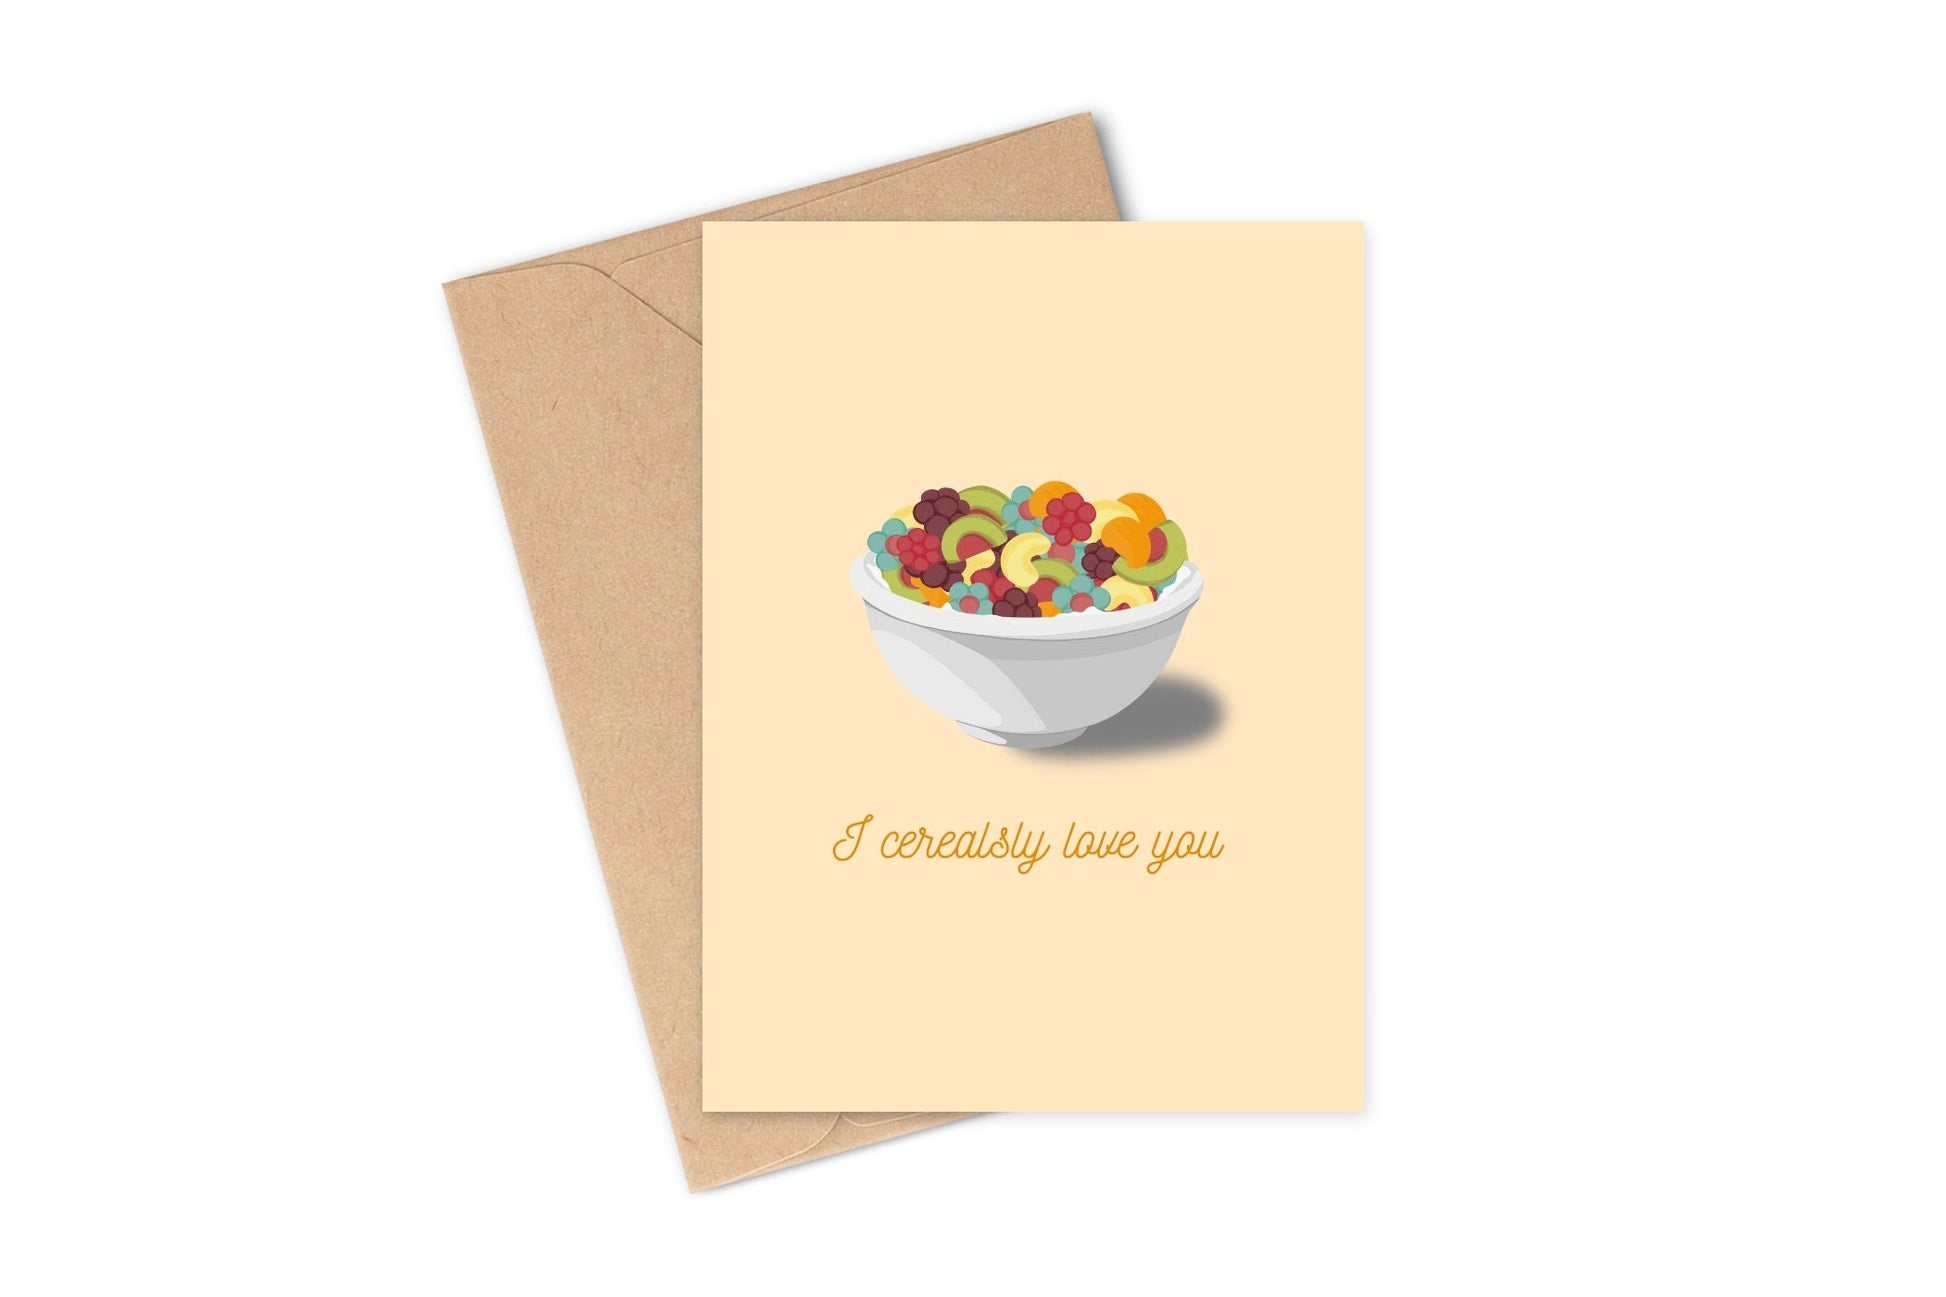 The perfect greeting card for your loved one! This card says "I cerealsly love you" and is cerealsly the cutest card around. It features a porcelain bowl of Trix cereal and milk. If you grew up eating cereal as a kid, this card is going to bring back ALL of the sugary sweet nostalgia. You might even have to go get your loved one a box of their own to deliver with this card! Now THAT would really impress them. 